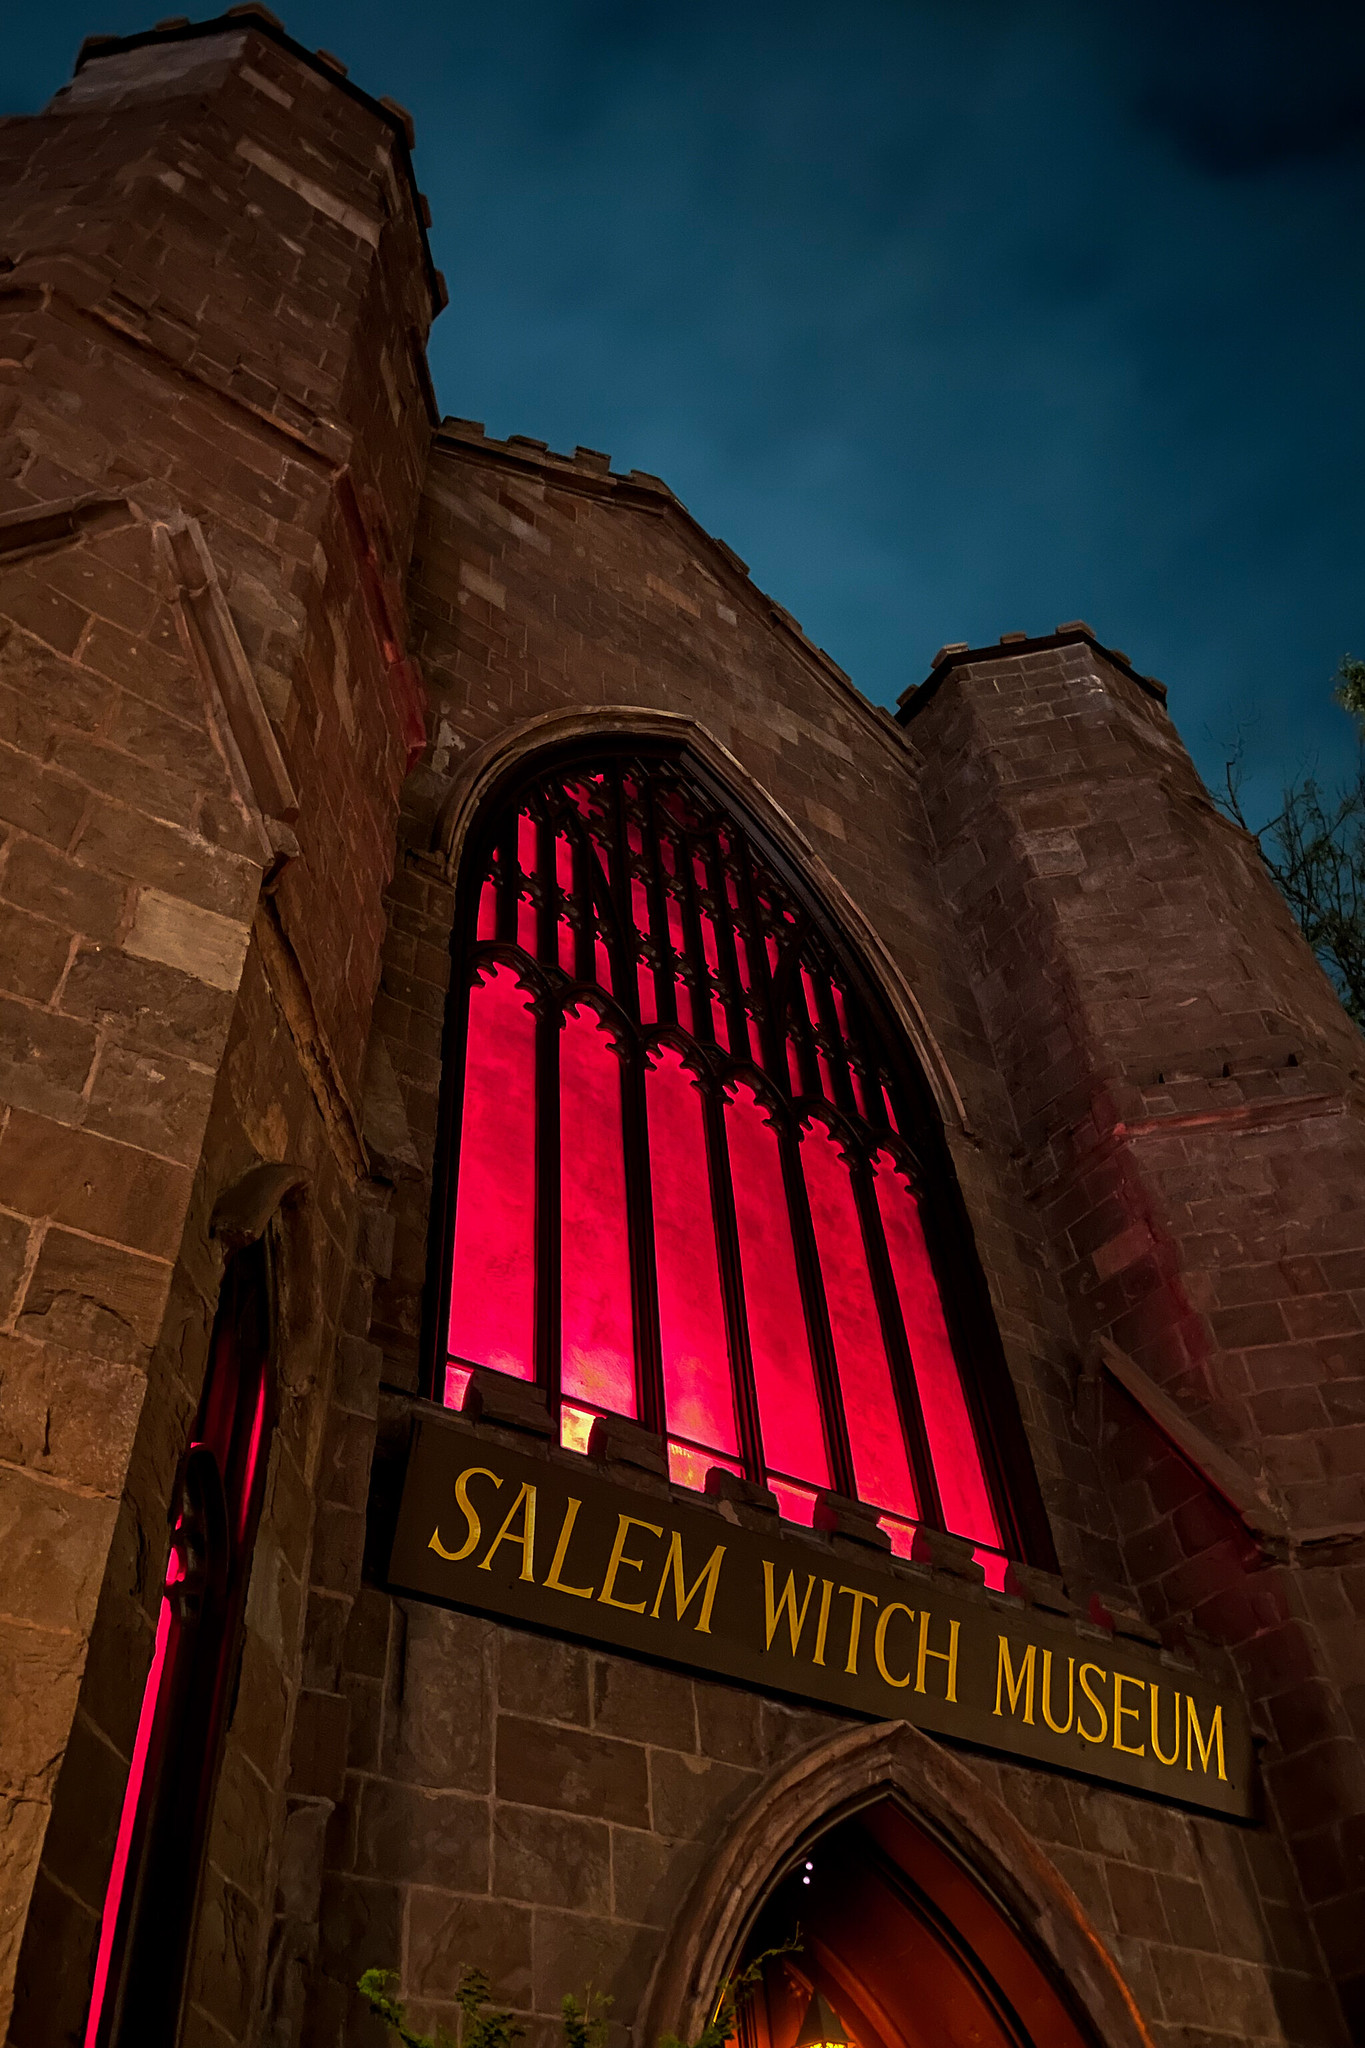 Salem Witch Museum at night